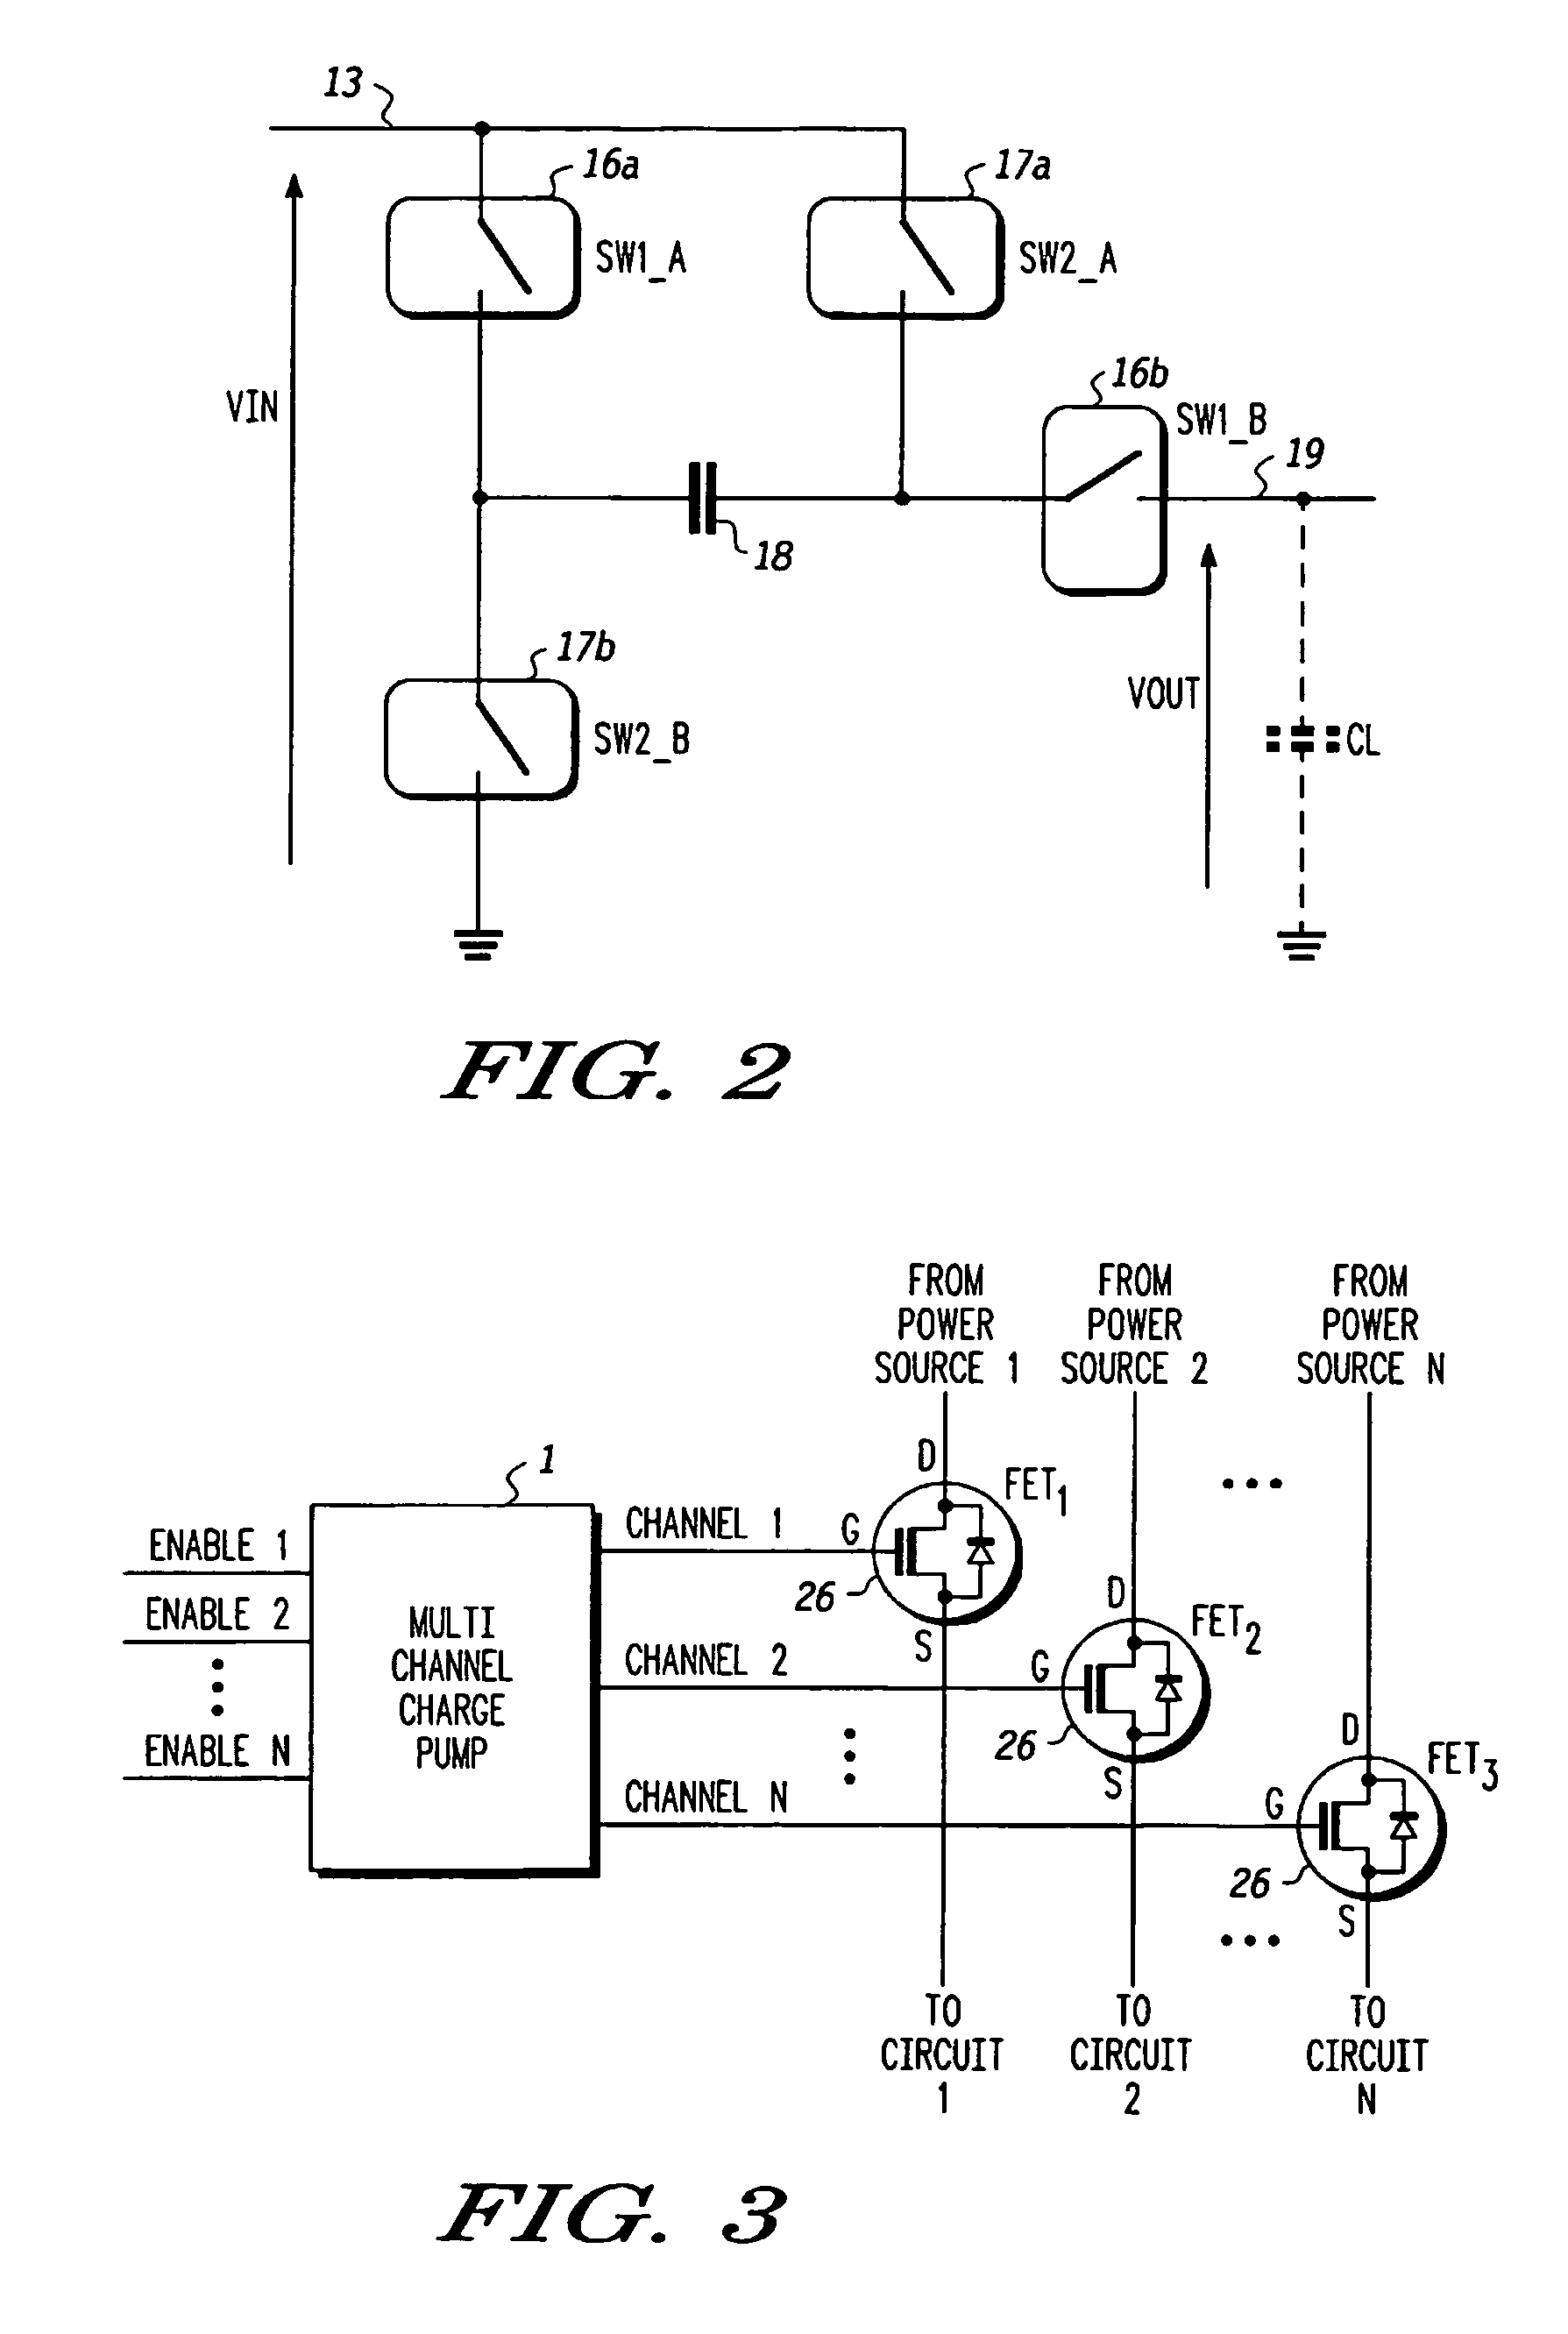 Charge pump and control scheme